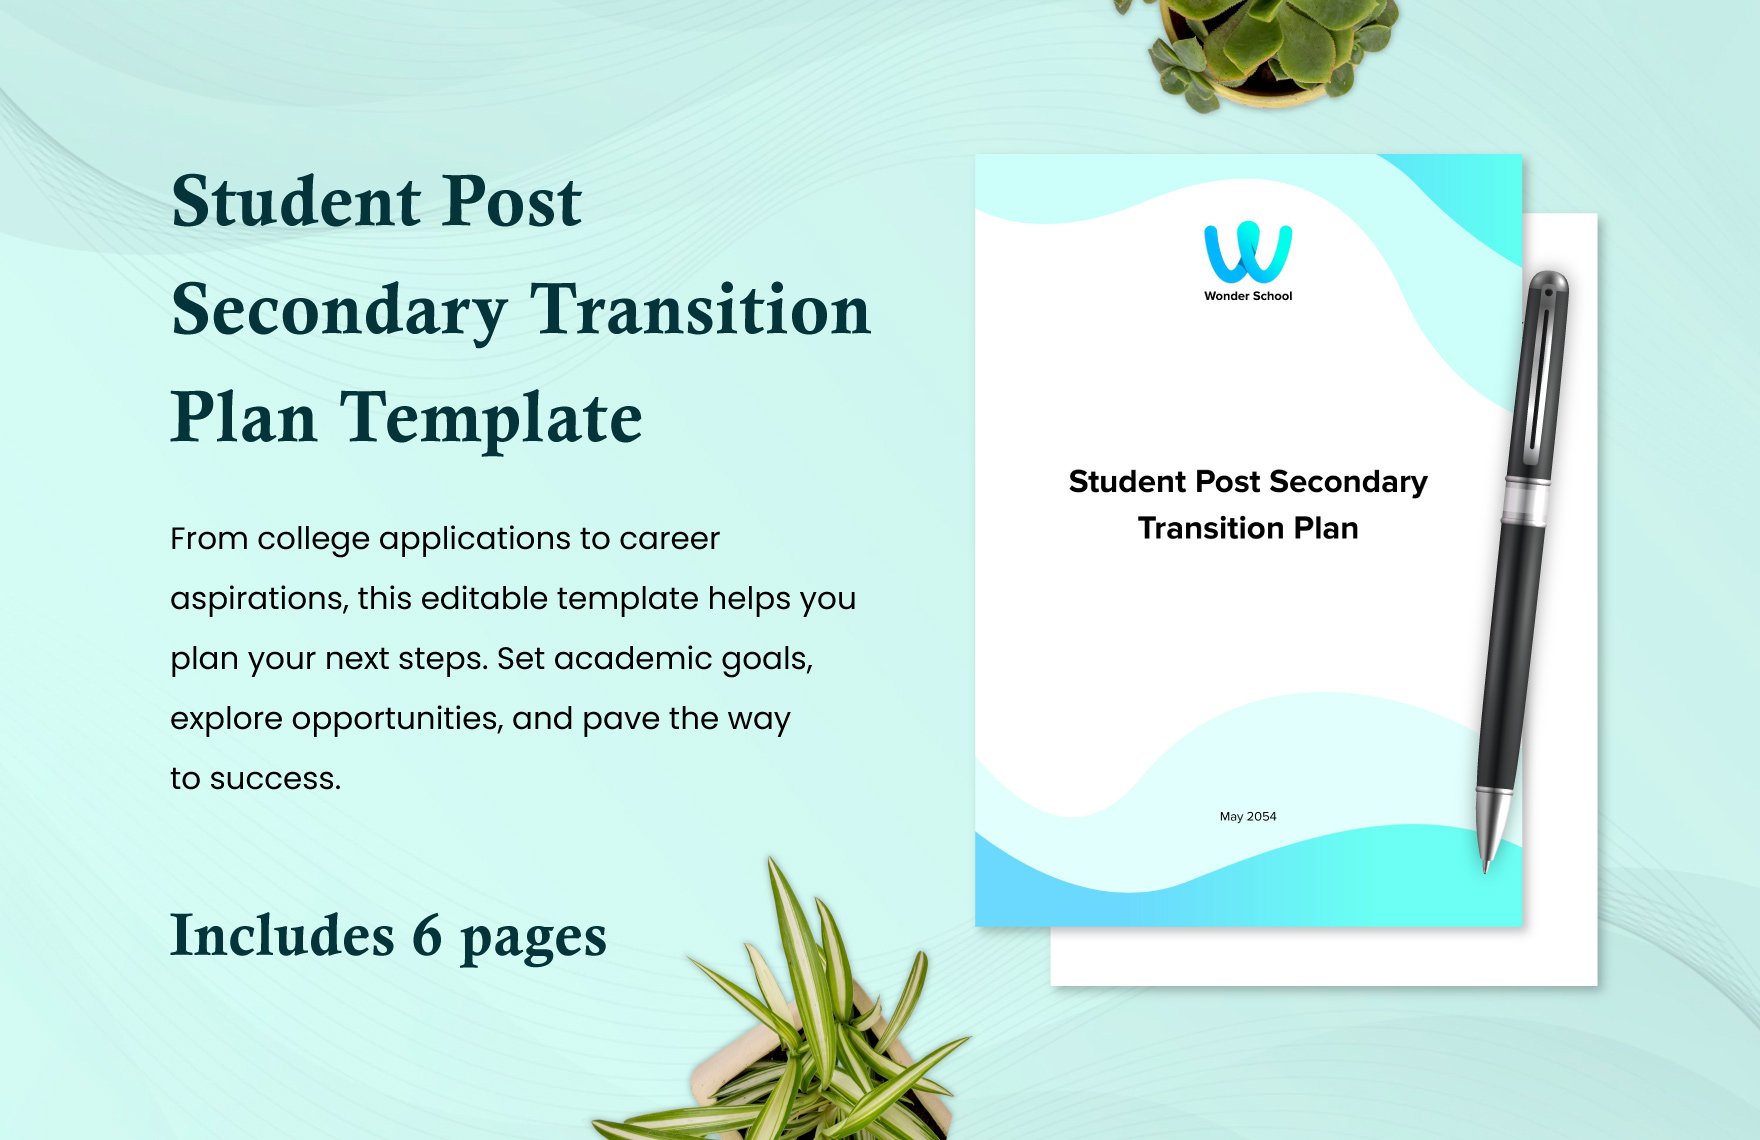 Student Post Secondary Transition Plan Template in Word, Google Docs, PDF